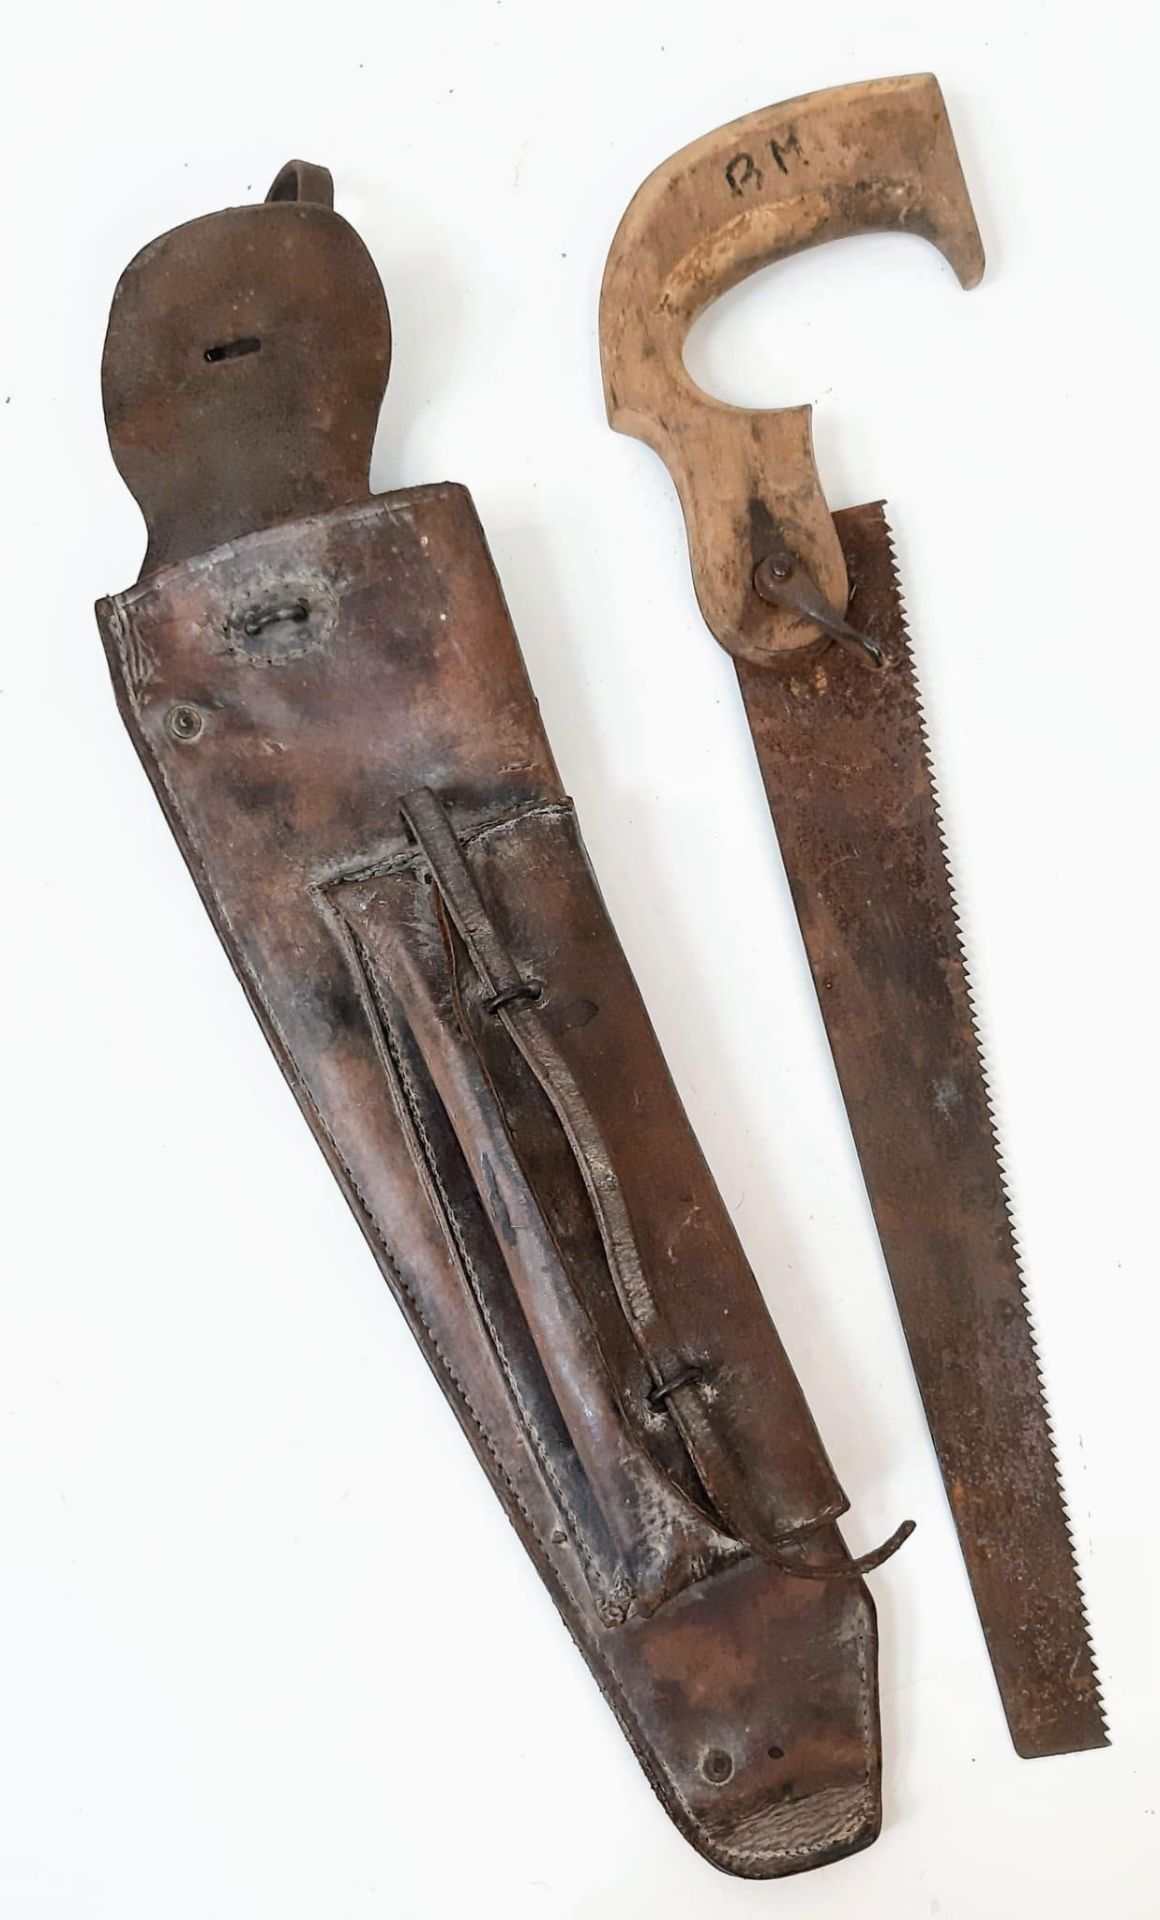 WW1 Allied Pioneers Saw in leather case (although a WW1 saw, was not initially for this case.